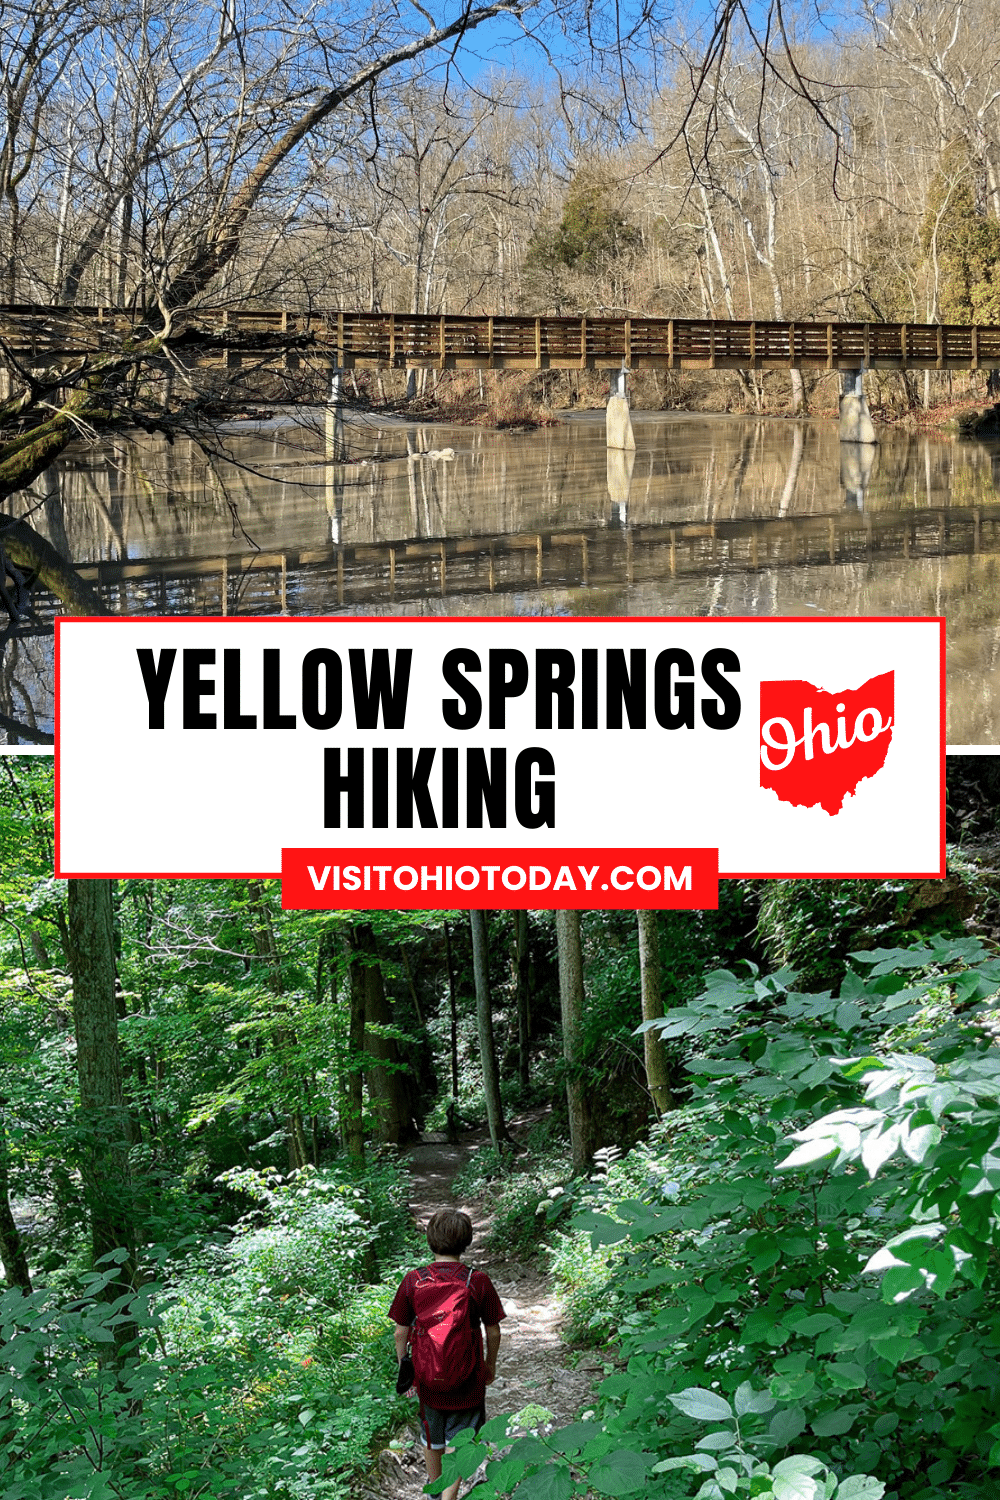 Yellow Springs is located just west of central Ohio. Yellow Springs Hiking is popular for all ages and skill levels. #yellowsprings #ohio #hiking